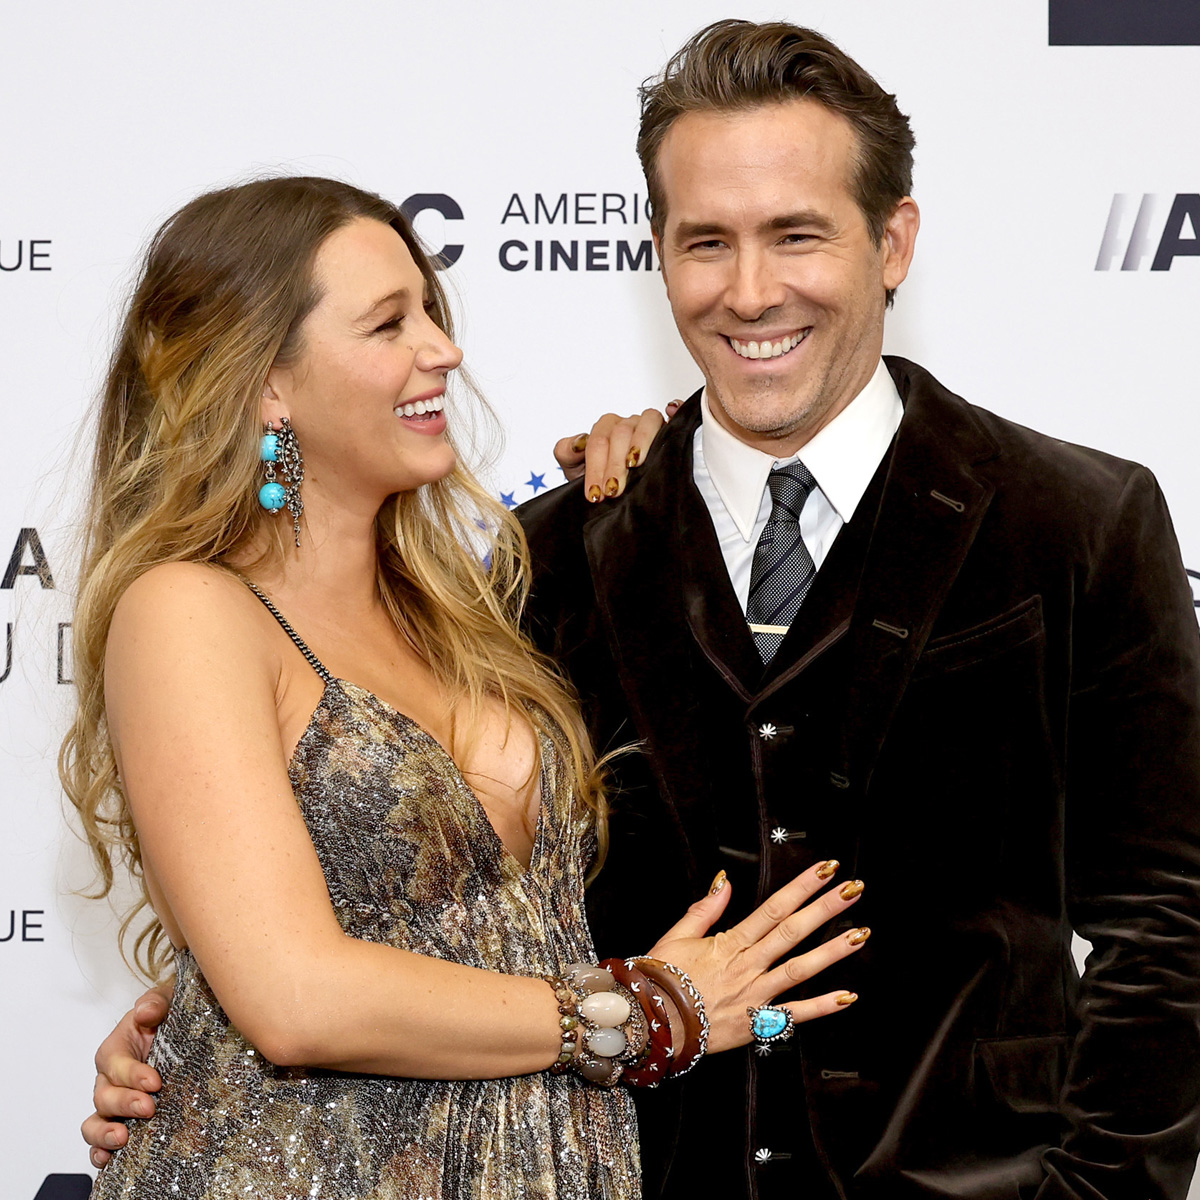 https://akns-images.eonline.com/eol_images/Entire_Site/20221018/rs_1200x1200-221118153416-1200-blake-lively-ryan-reynolds-cinematheque.jpg?fit=around%7C1200:1200&output-quality=90&crop=1200:1200;center,top